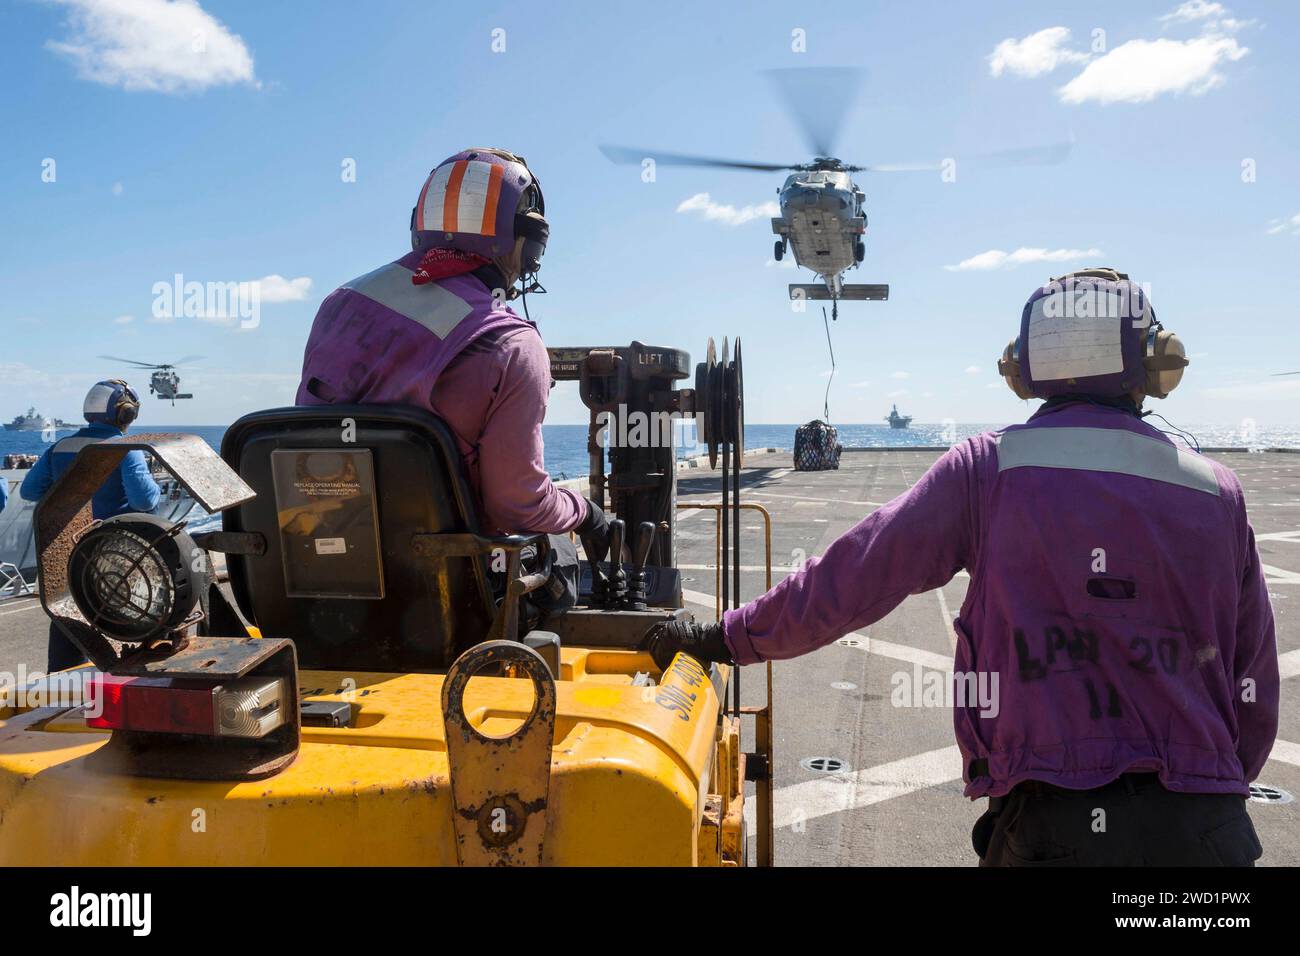 An MH-60S Sea Hawk helicopter drops cargo pallets on the flight deck of USS Green Bay. Stock Photo